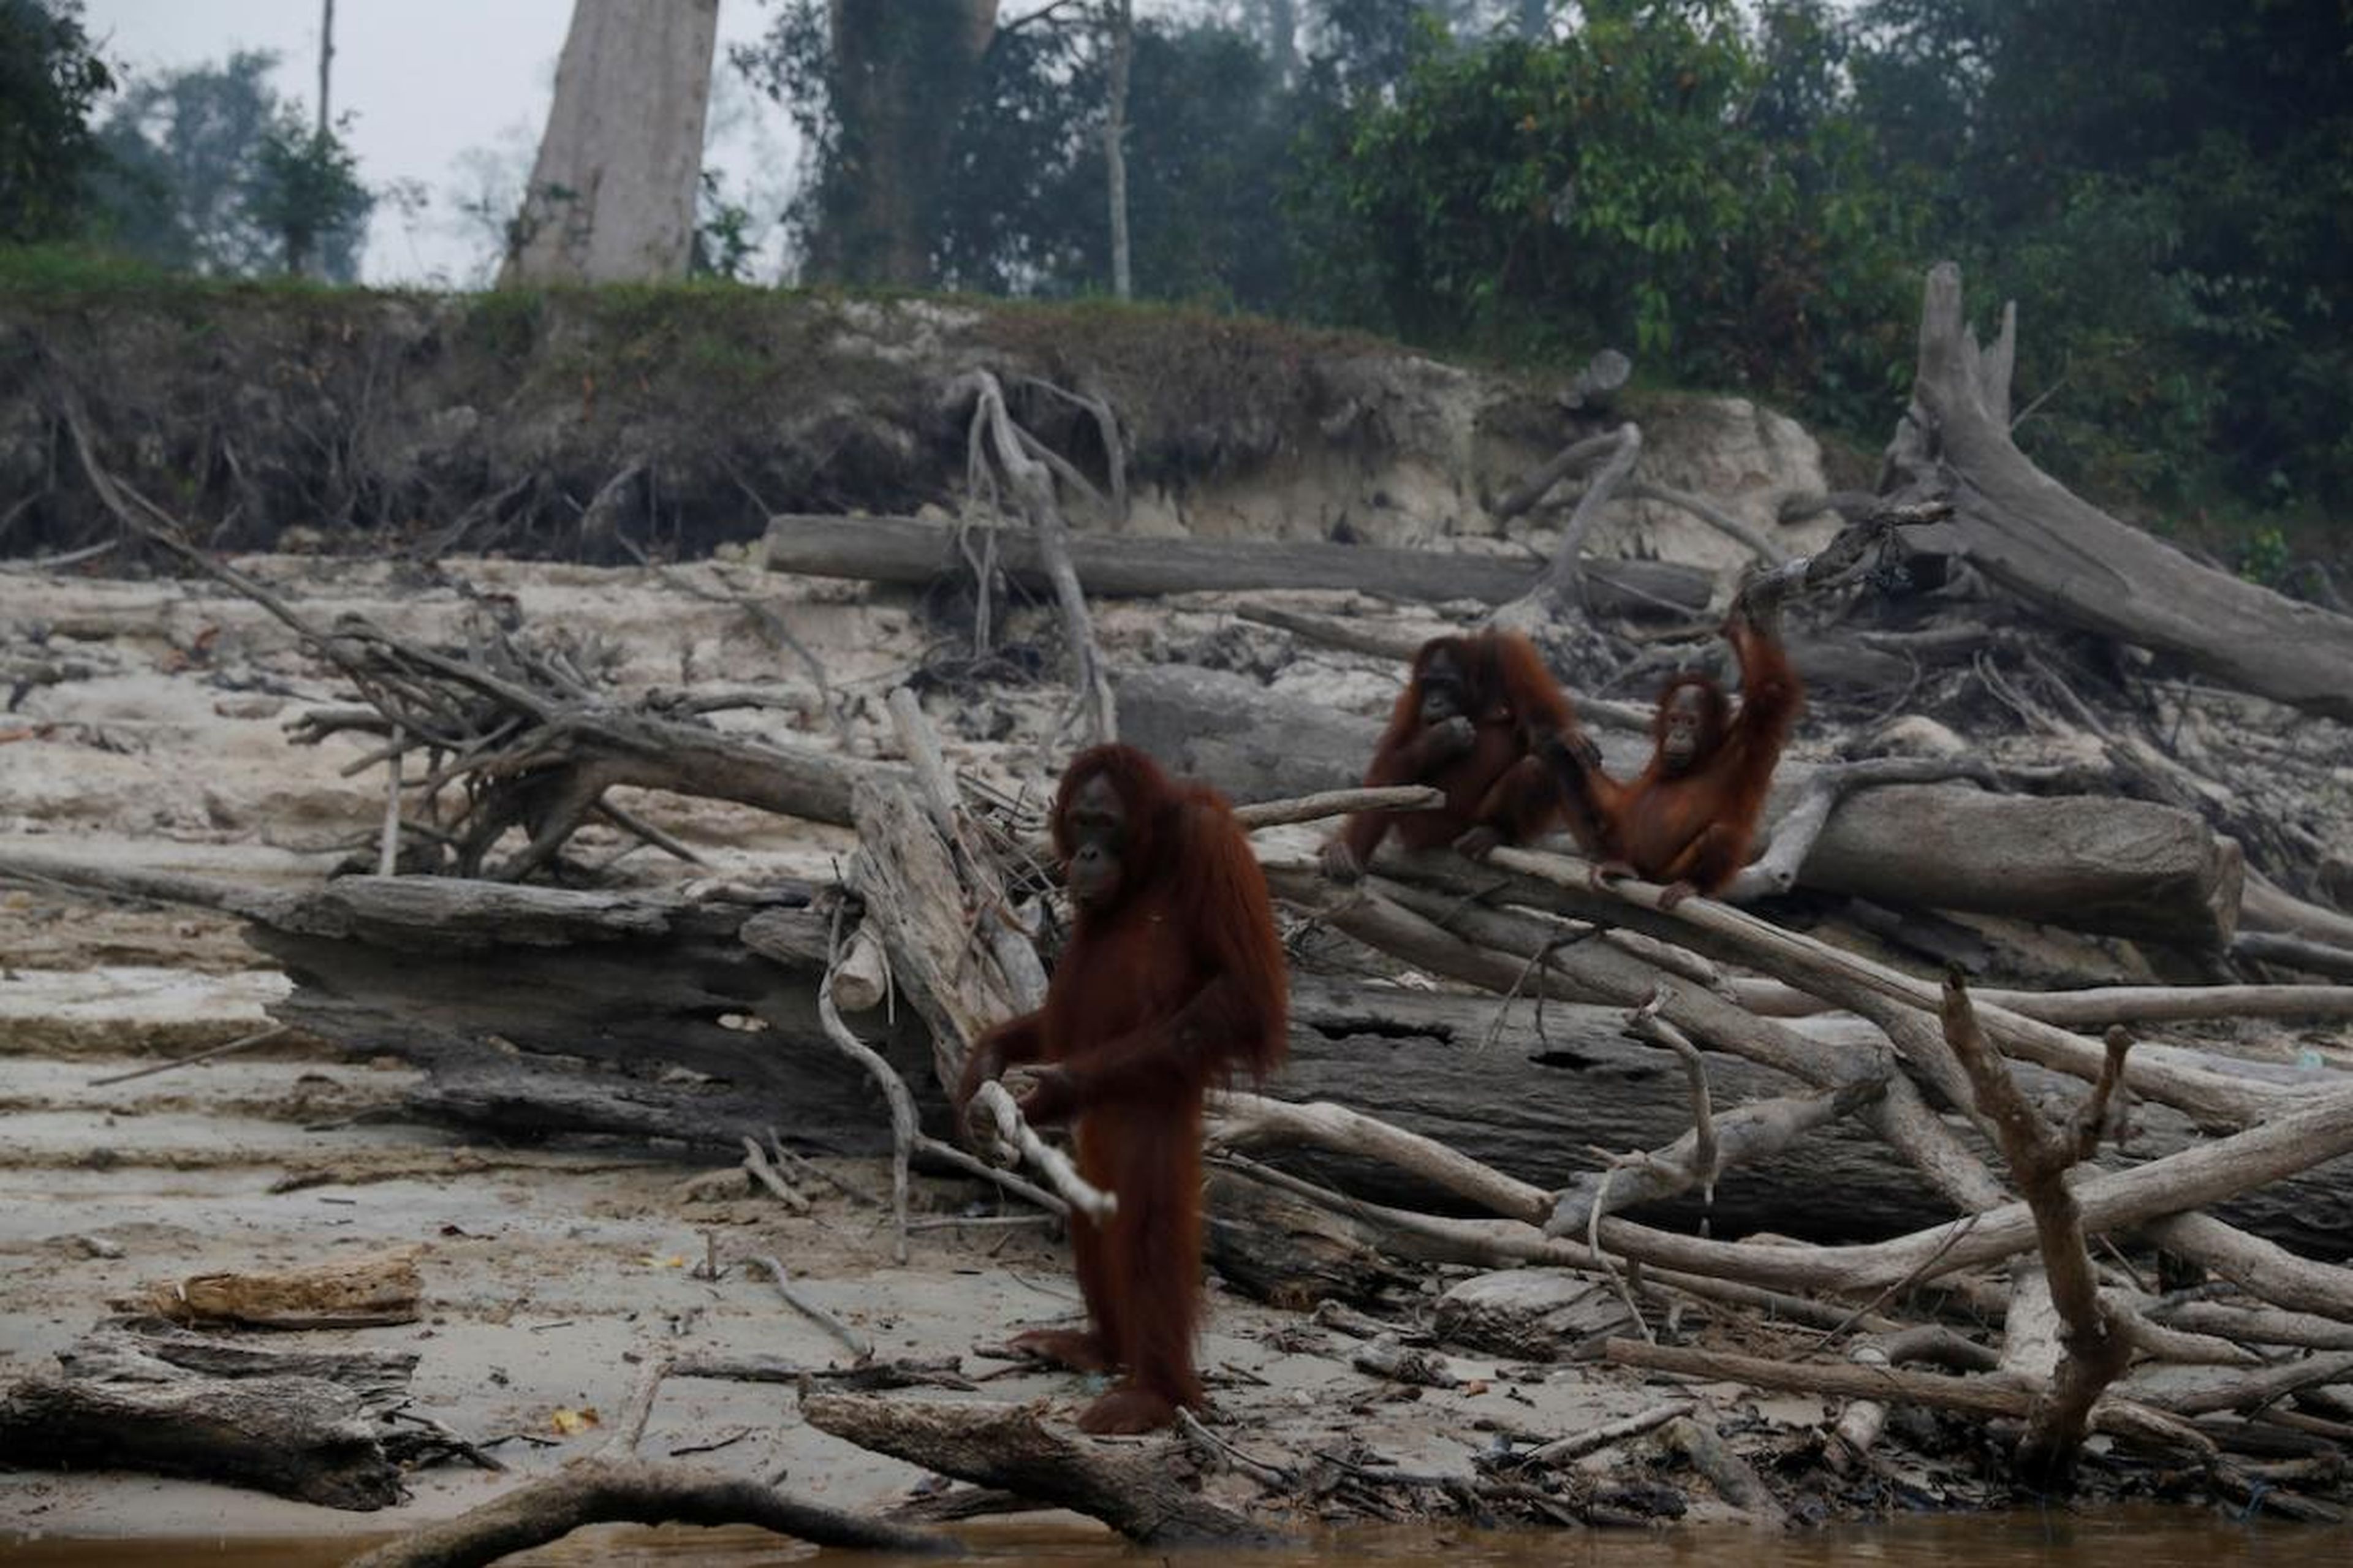 Orangutans gather as smoke covers Salat Island, near Palangka Raya, Indonesia — which is used by Borneo Orangutan Survival Foundation (BOSF) as a pre-release island for the animals — on September 15.